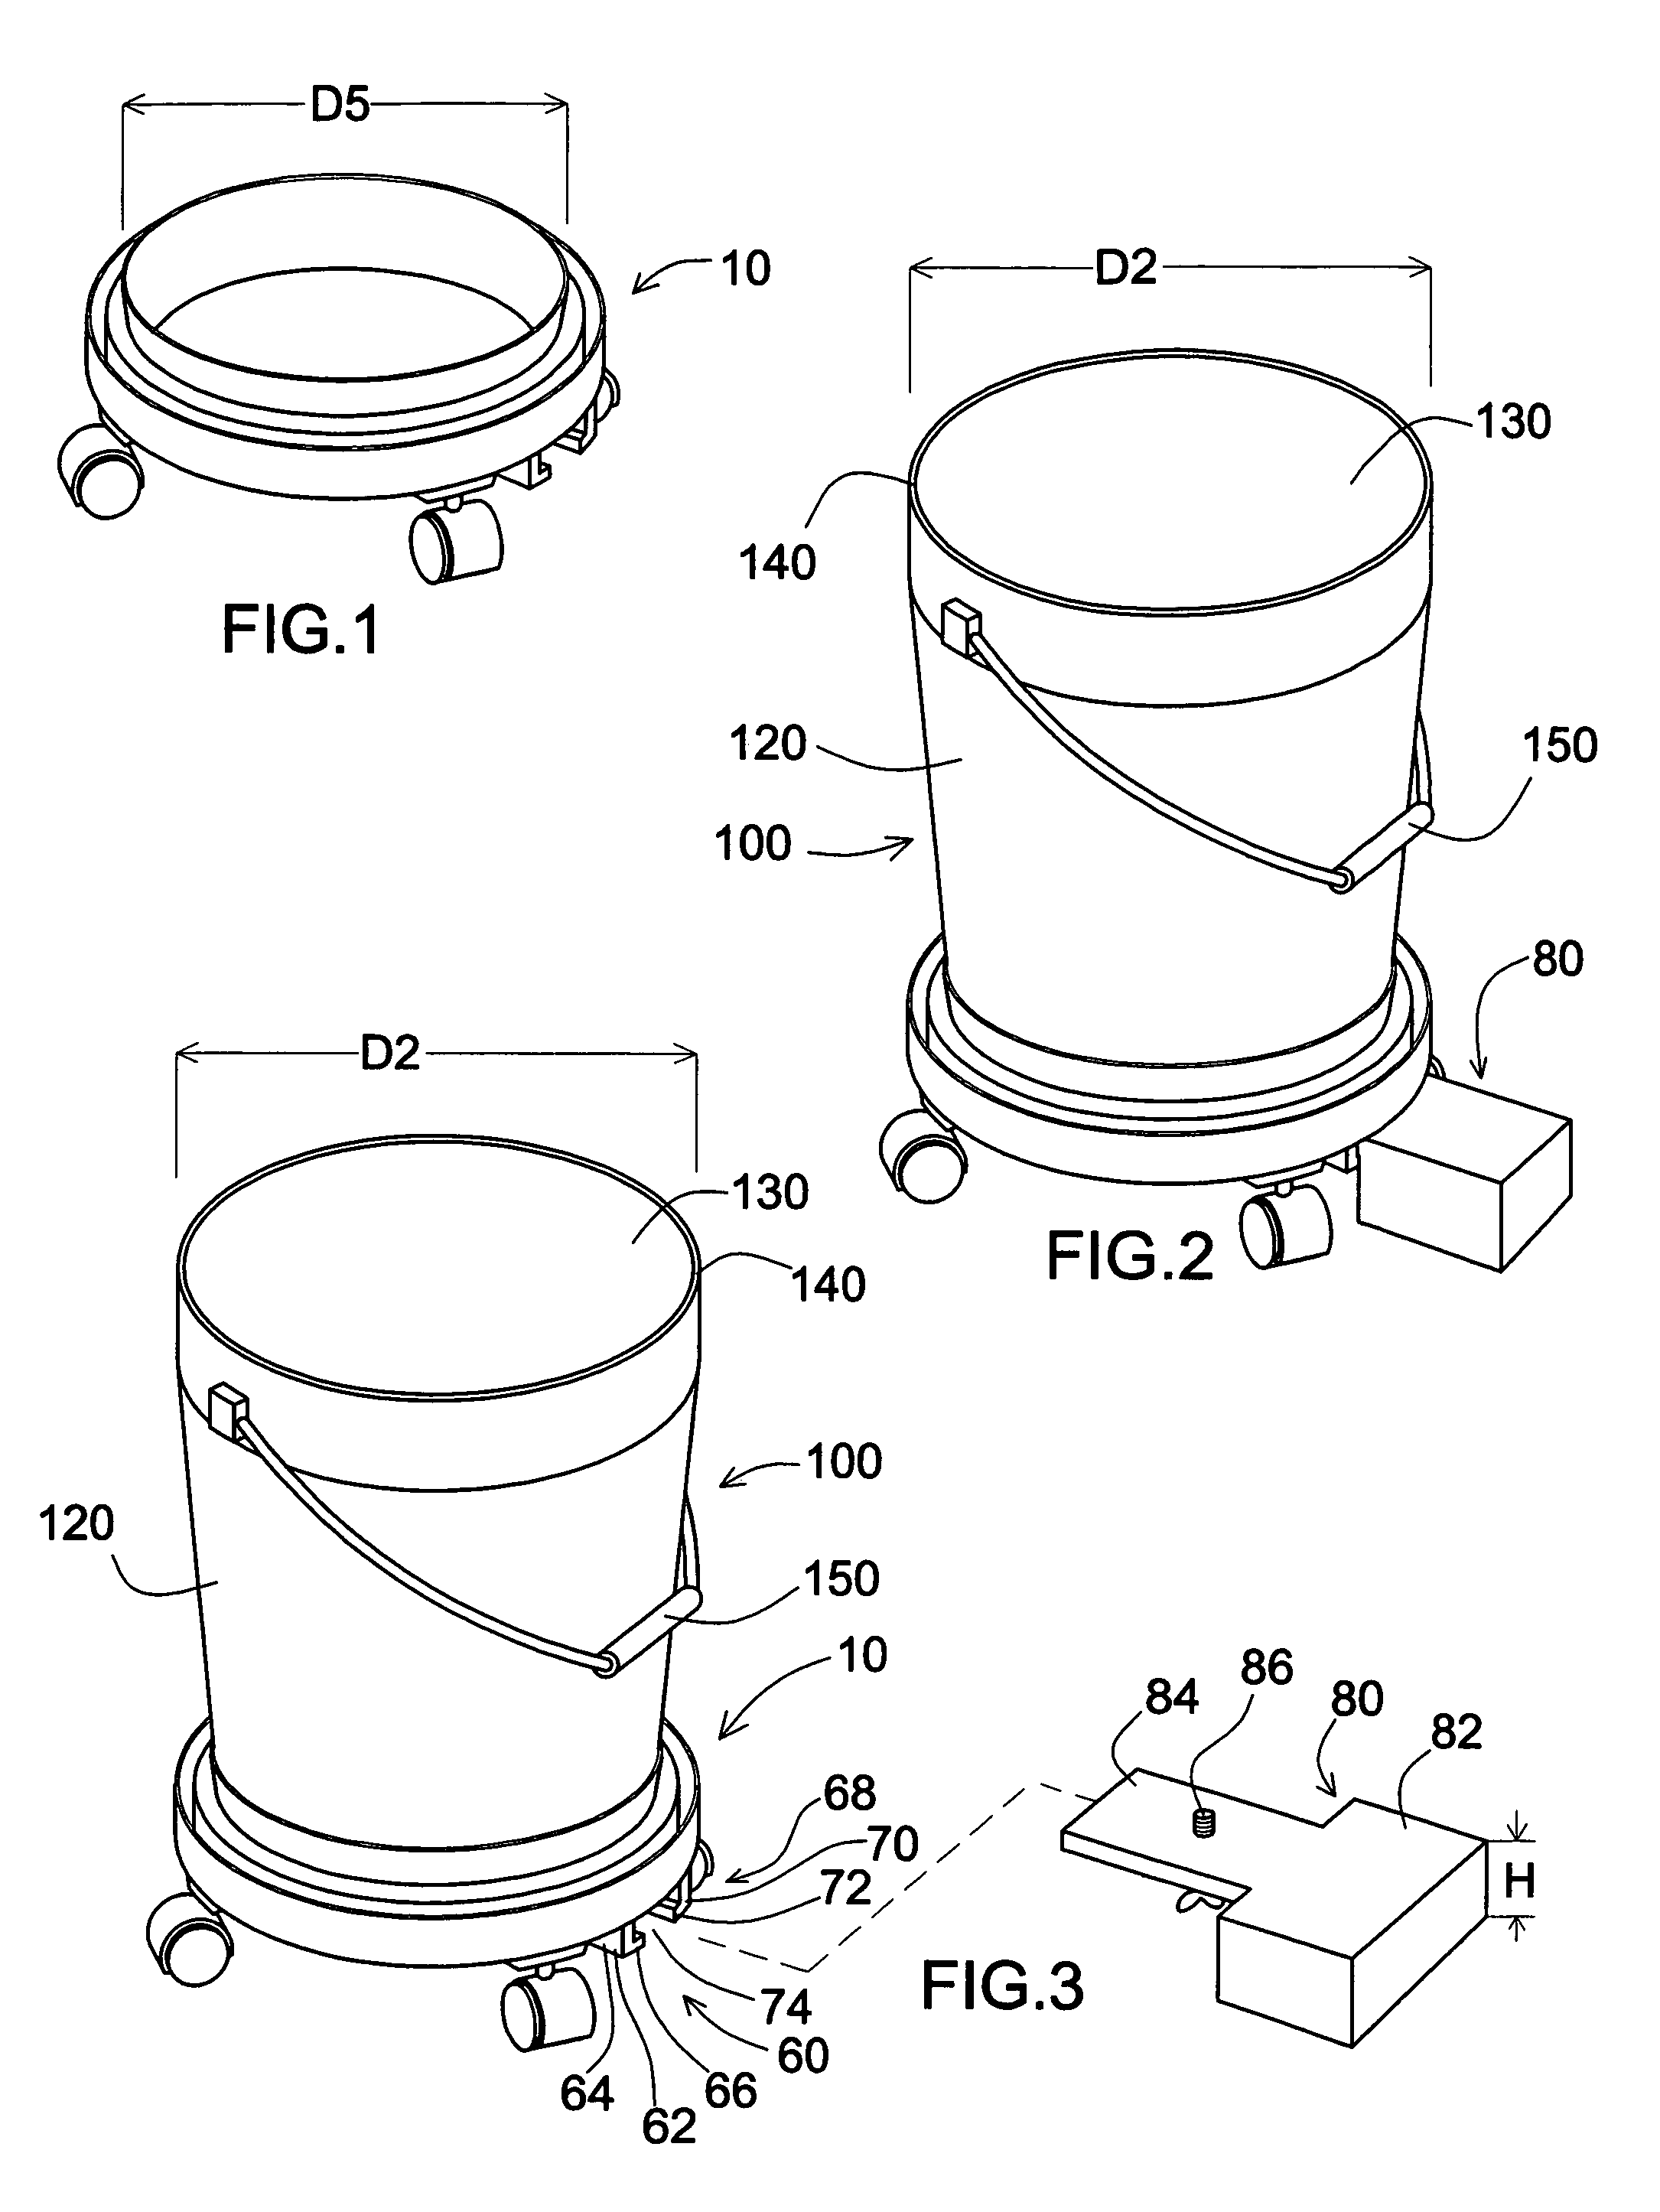 Device for transforming a stationary bucket into a rolling bucket, functioning as a lid, and also facilitating attachment of a substance removal device